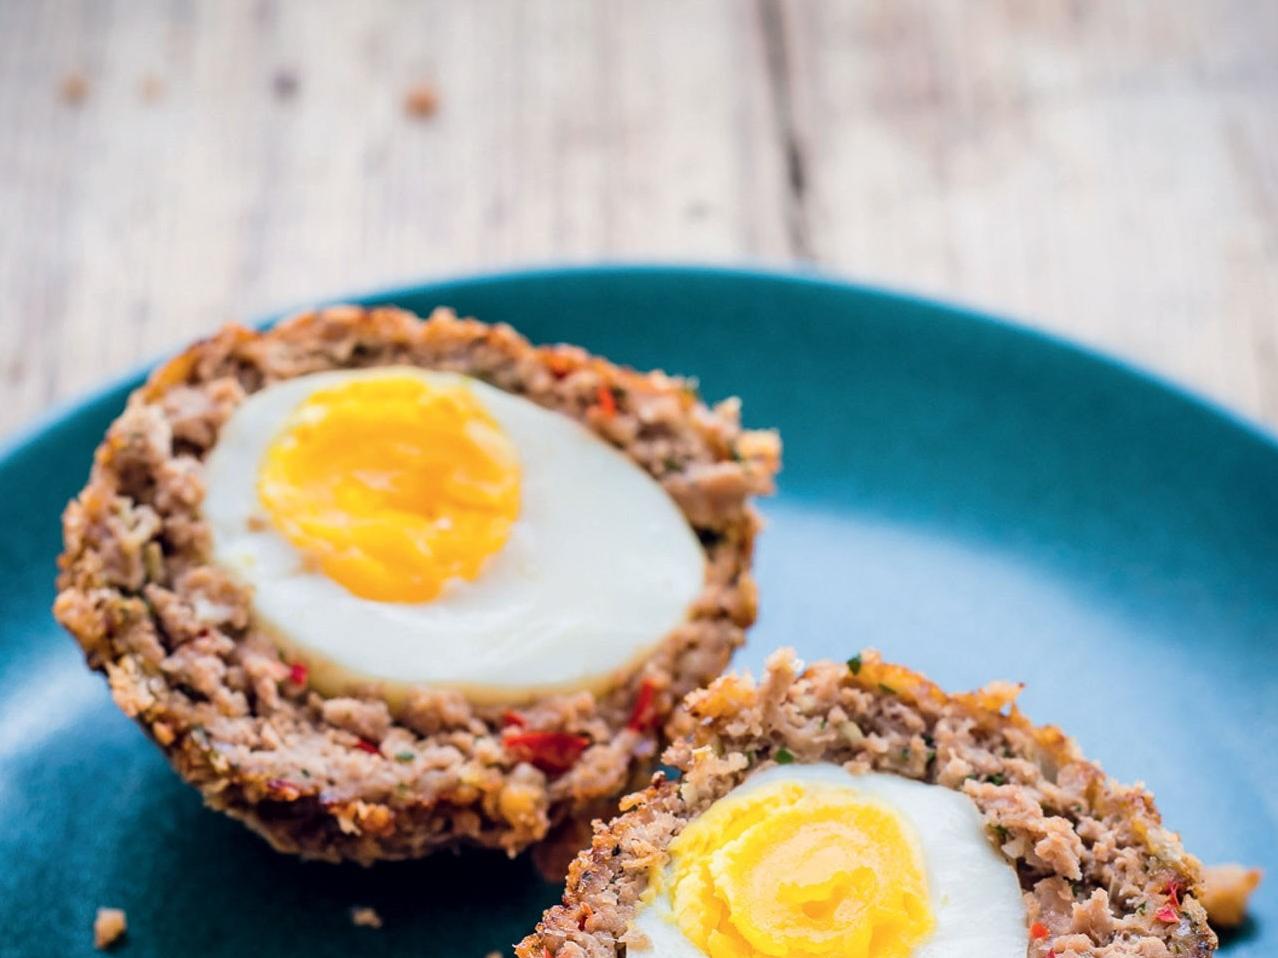  Crispy coating, creamy yolk, and spicy sausage – Spiced Scotch Eggs have got it all!